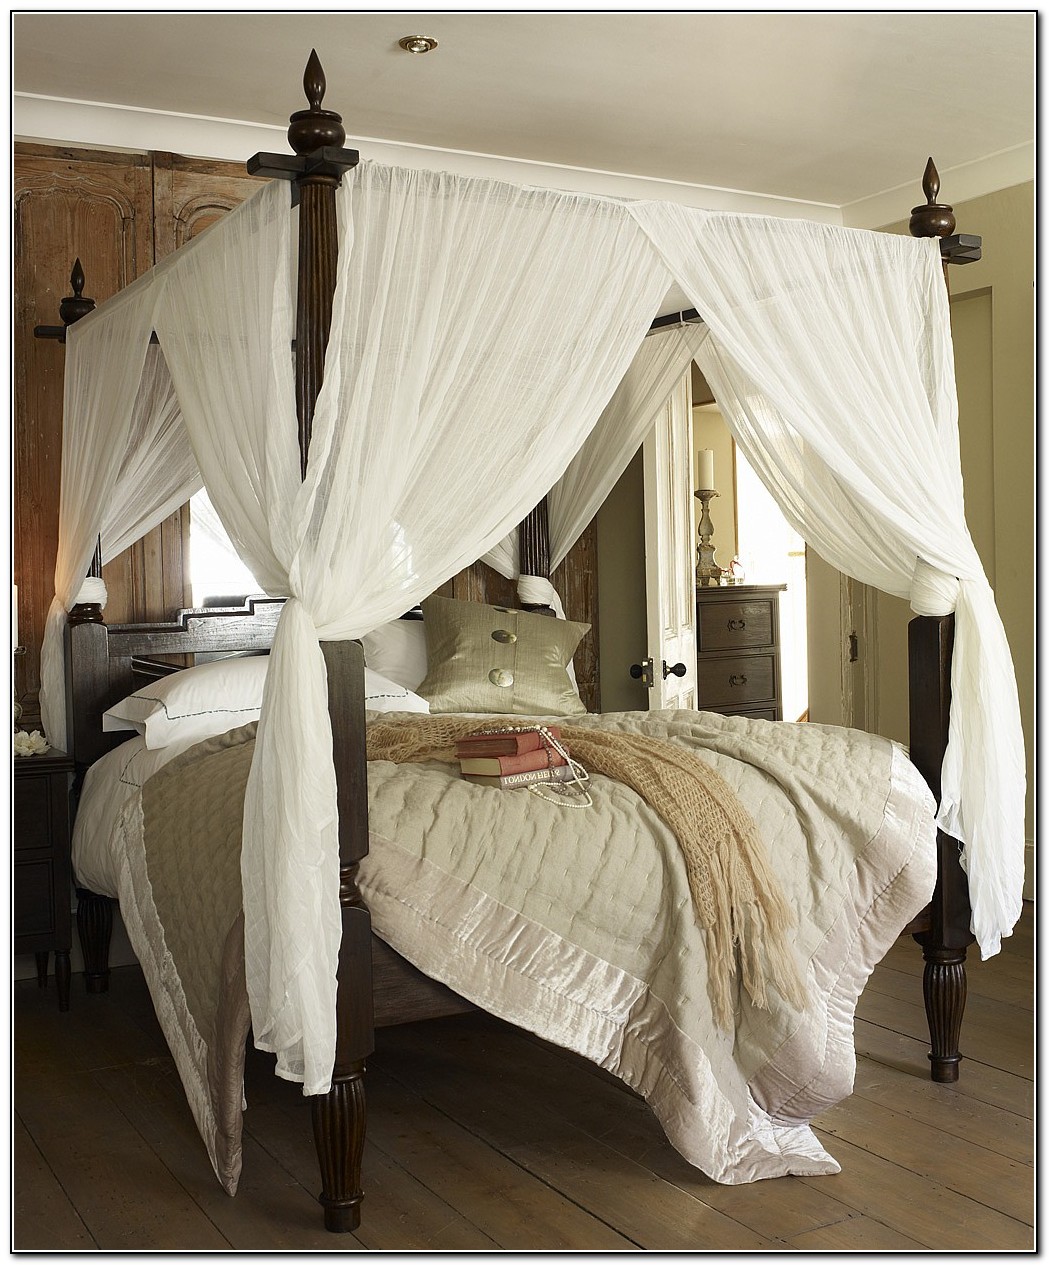 4 Poster Bed Canopy